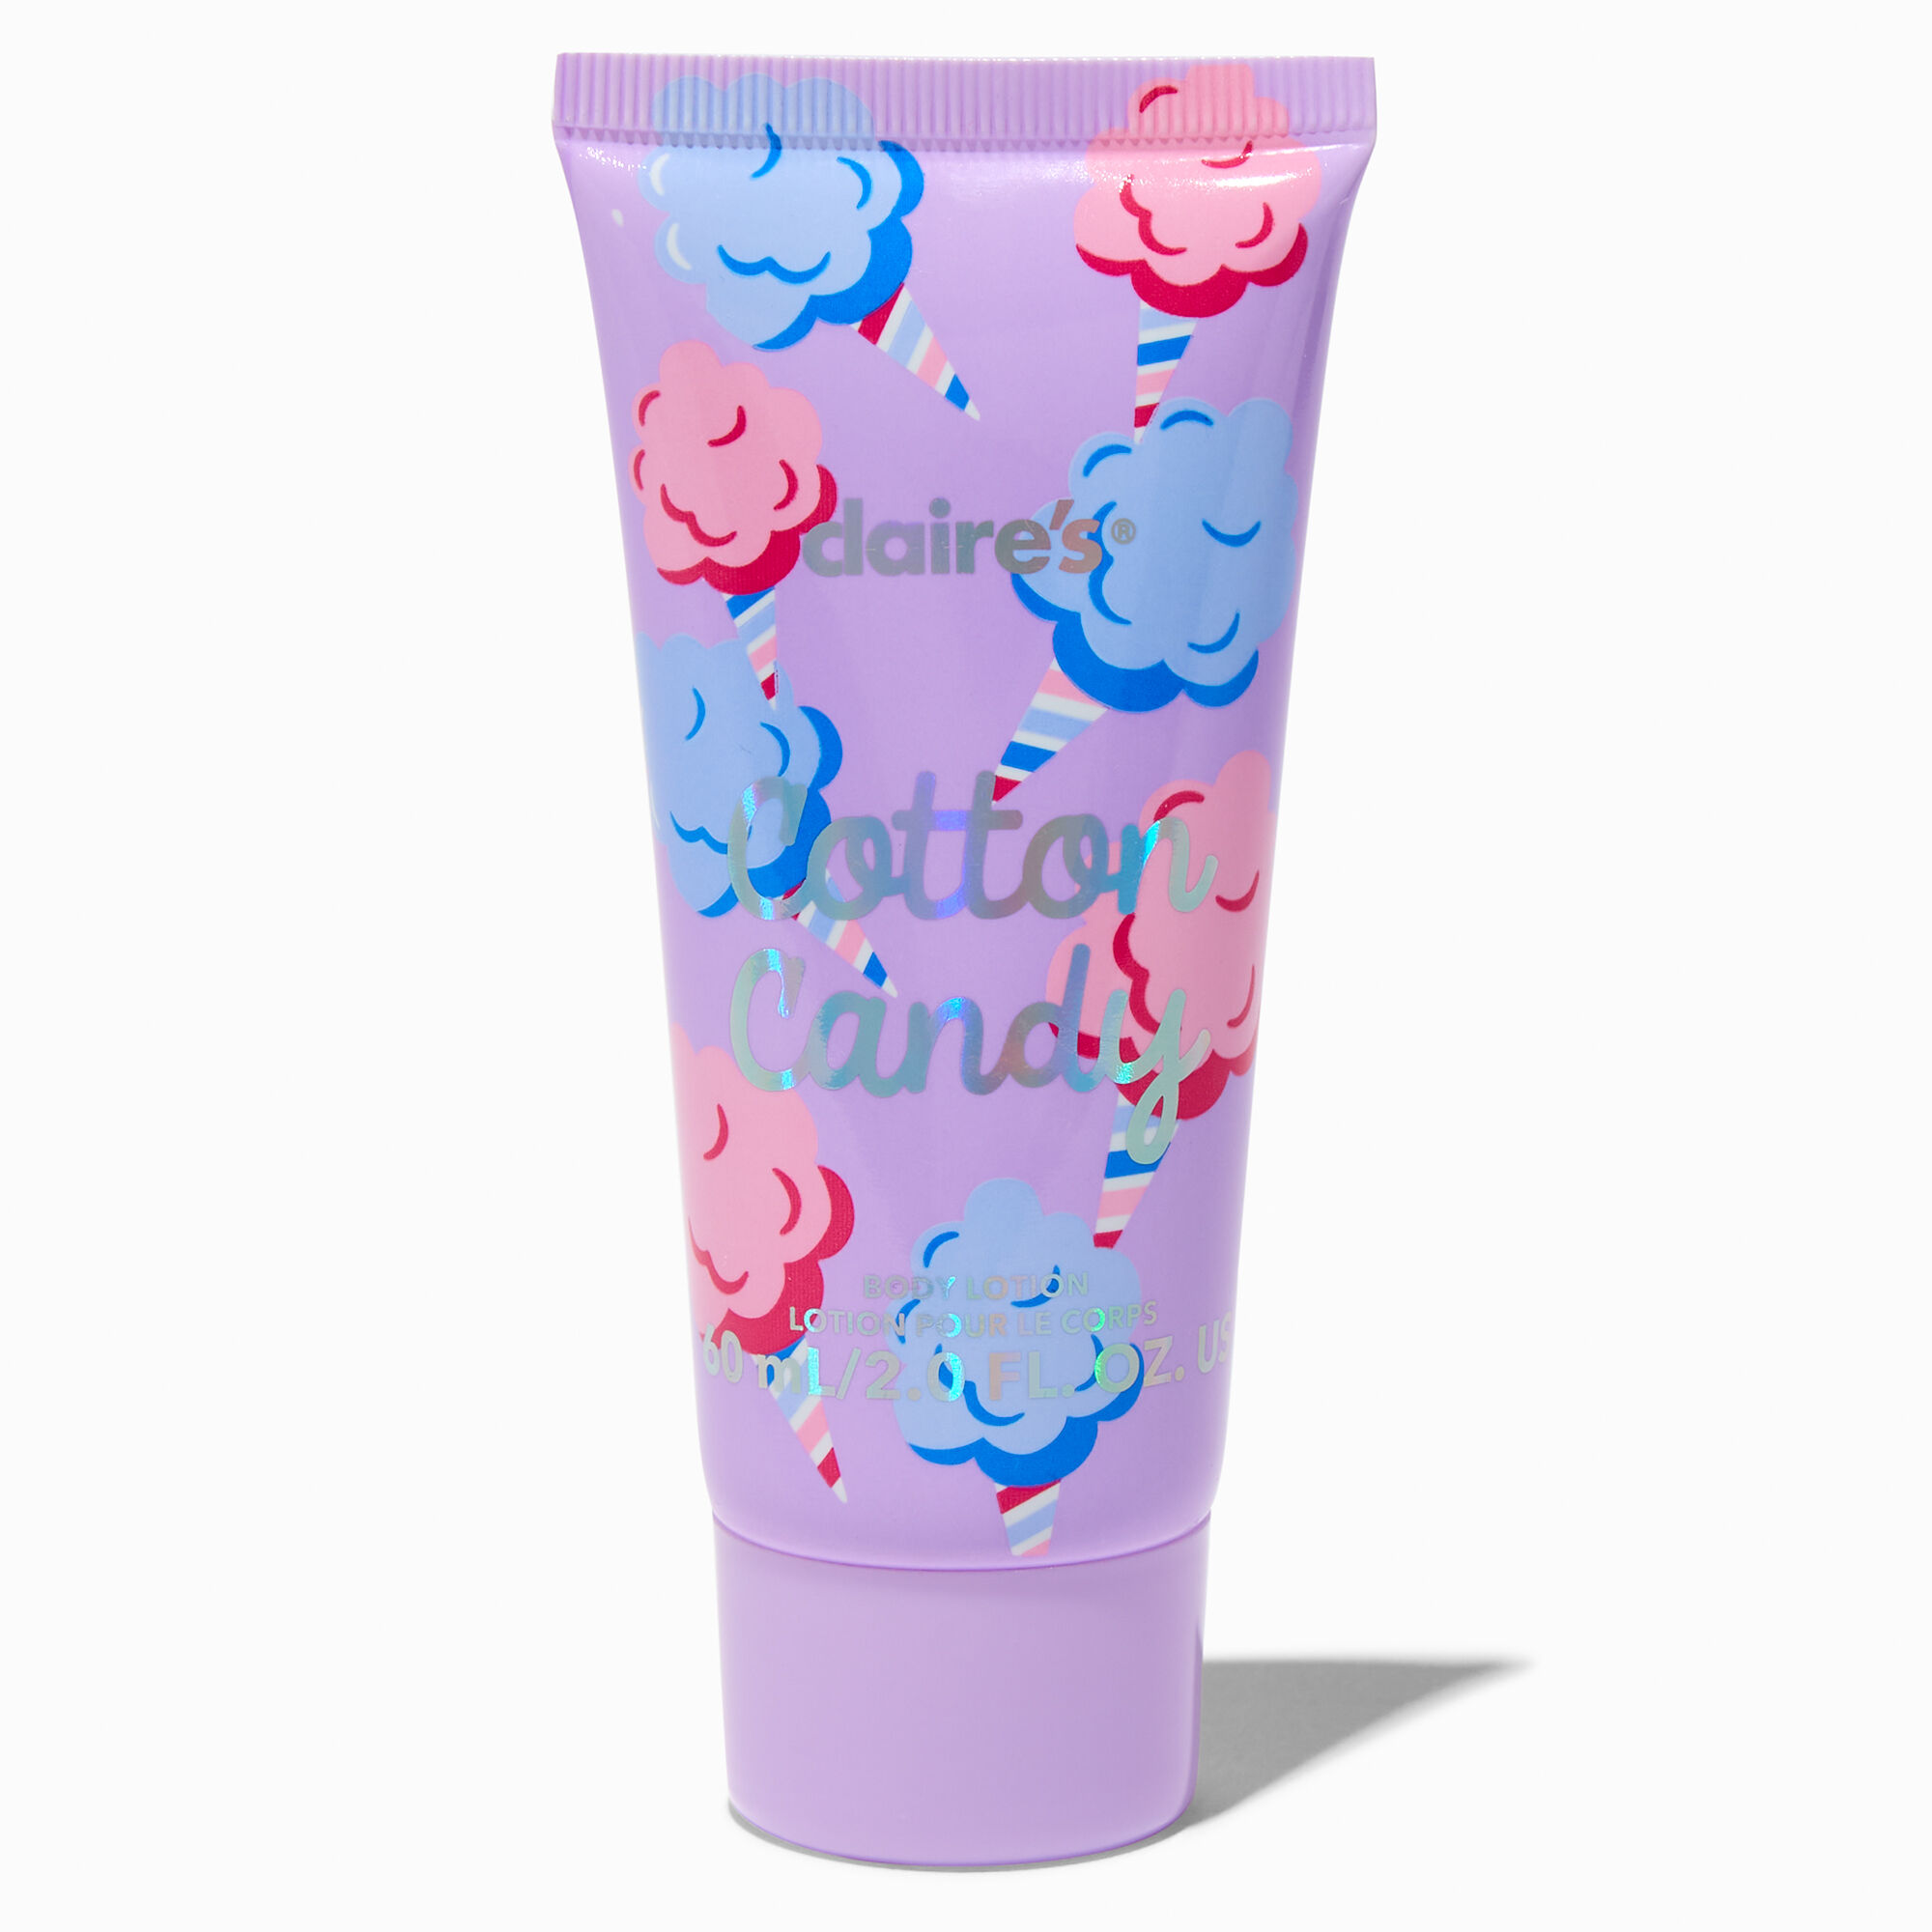 View Claires Cotton Candy Body Lotion information